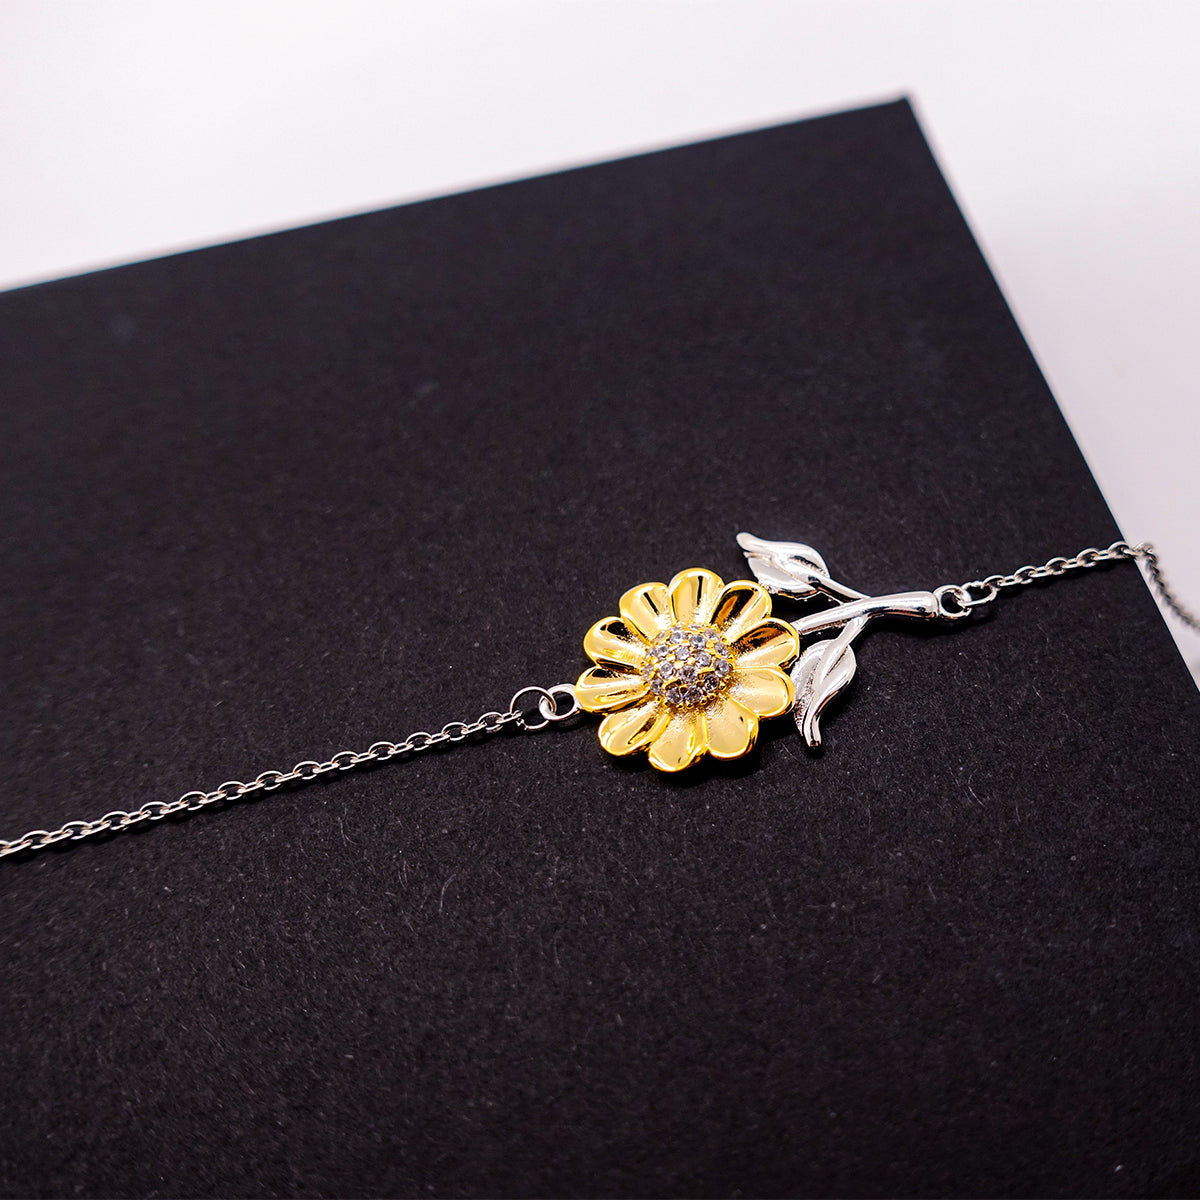 To My Amazing Son Supporting Sunflower Bracelet, Life is an adventure waiting to be explored, Birthday Unique Gifts for Son from Mum